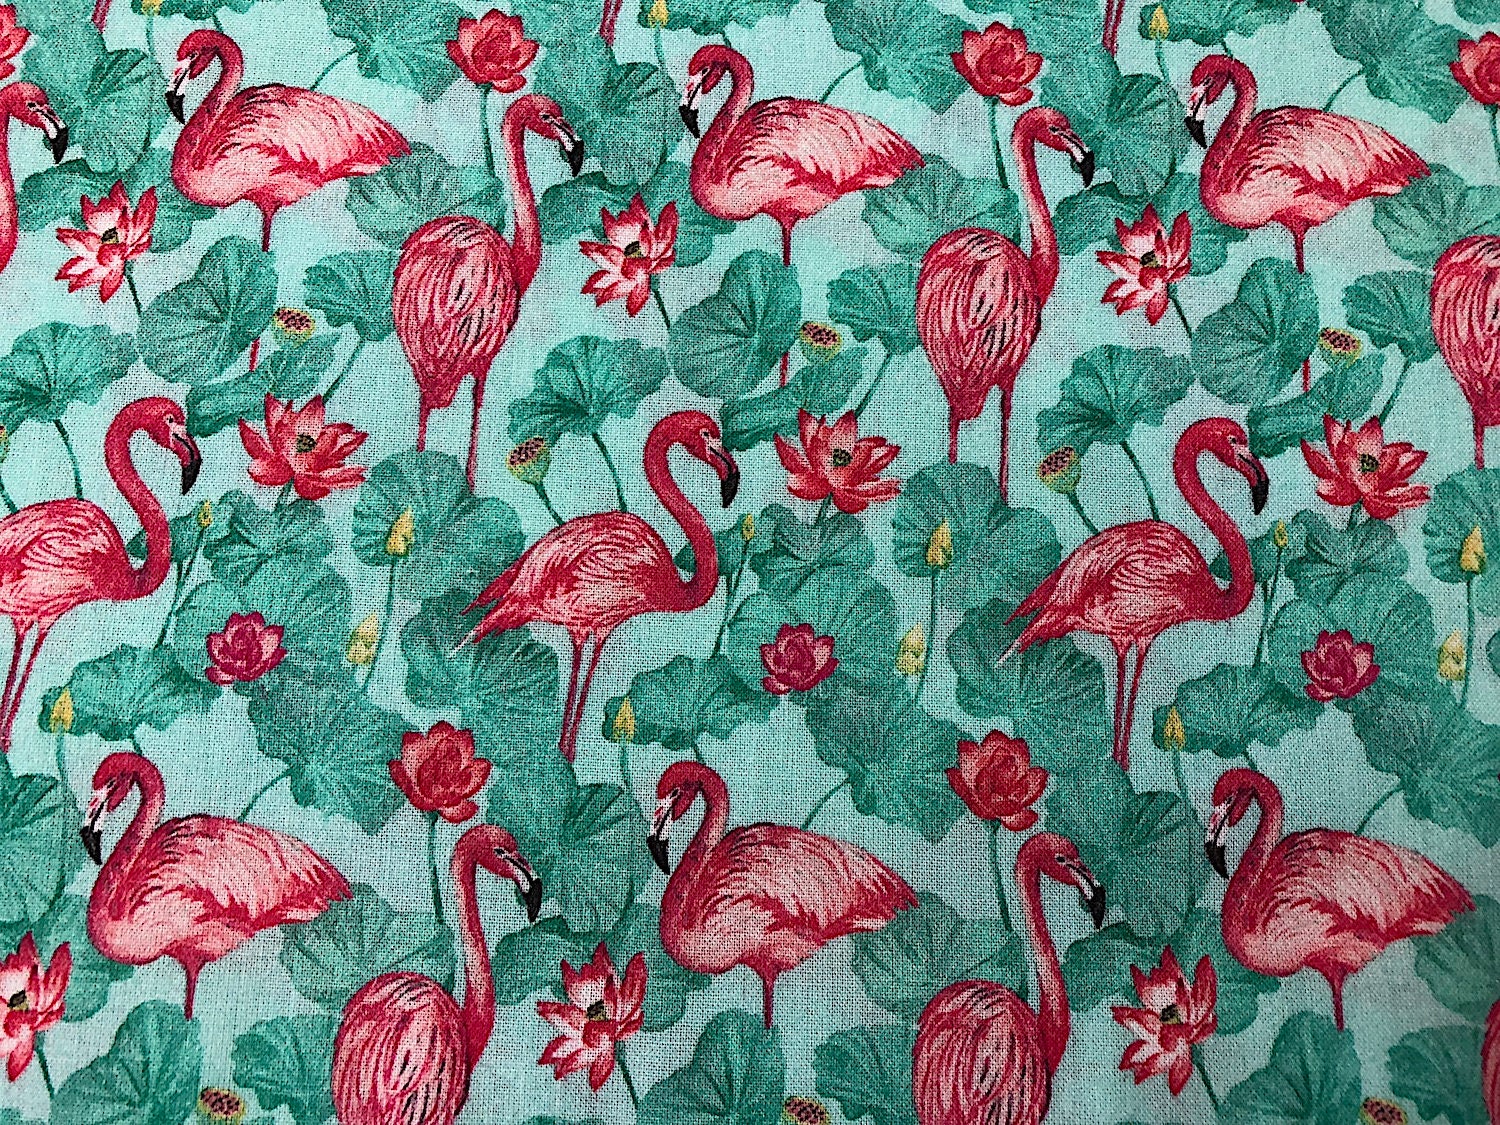 Cotton fabric covered with pink flamingoes and green leaves.